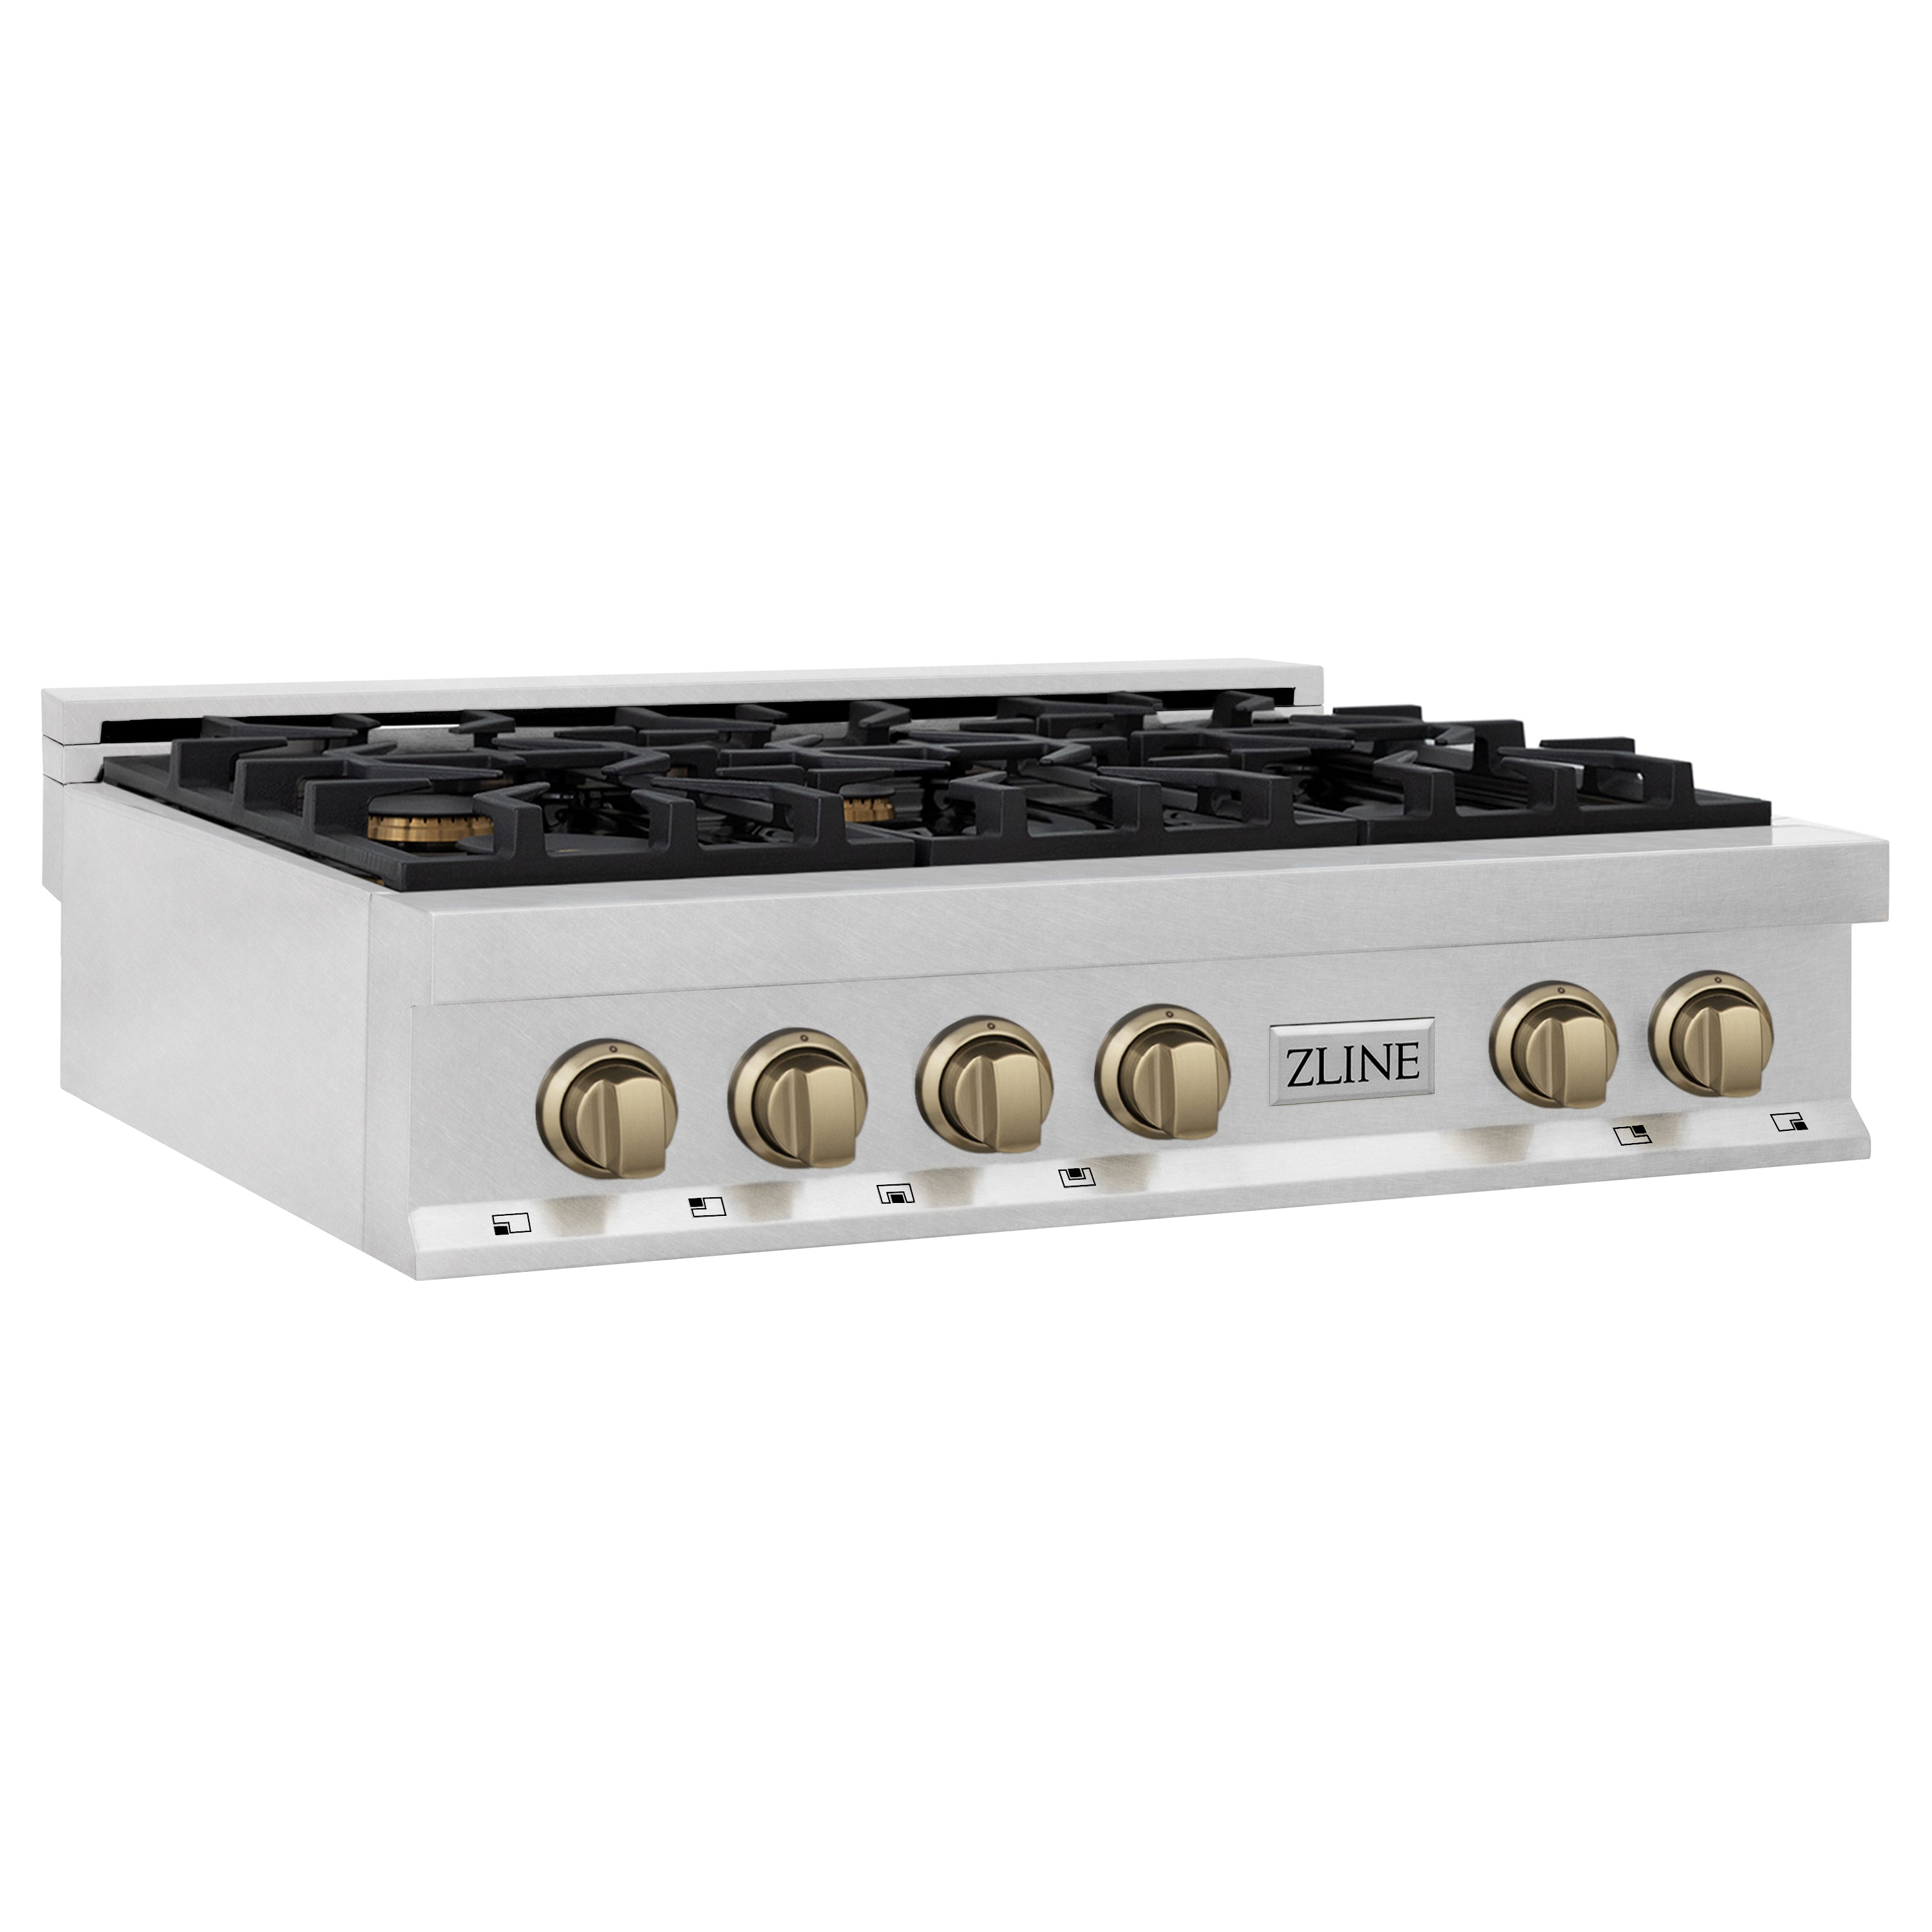 ZLINE Autograph Edition 36 in. Porcelain Rangetop with 6 Gas Burners in DuraSnow Stainless Steel with Champagne Bronze Accents (RTSZ-36-CB)